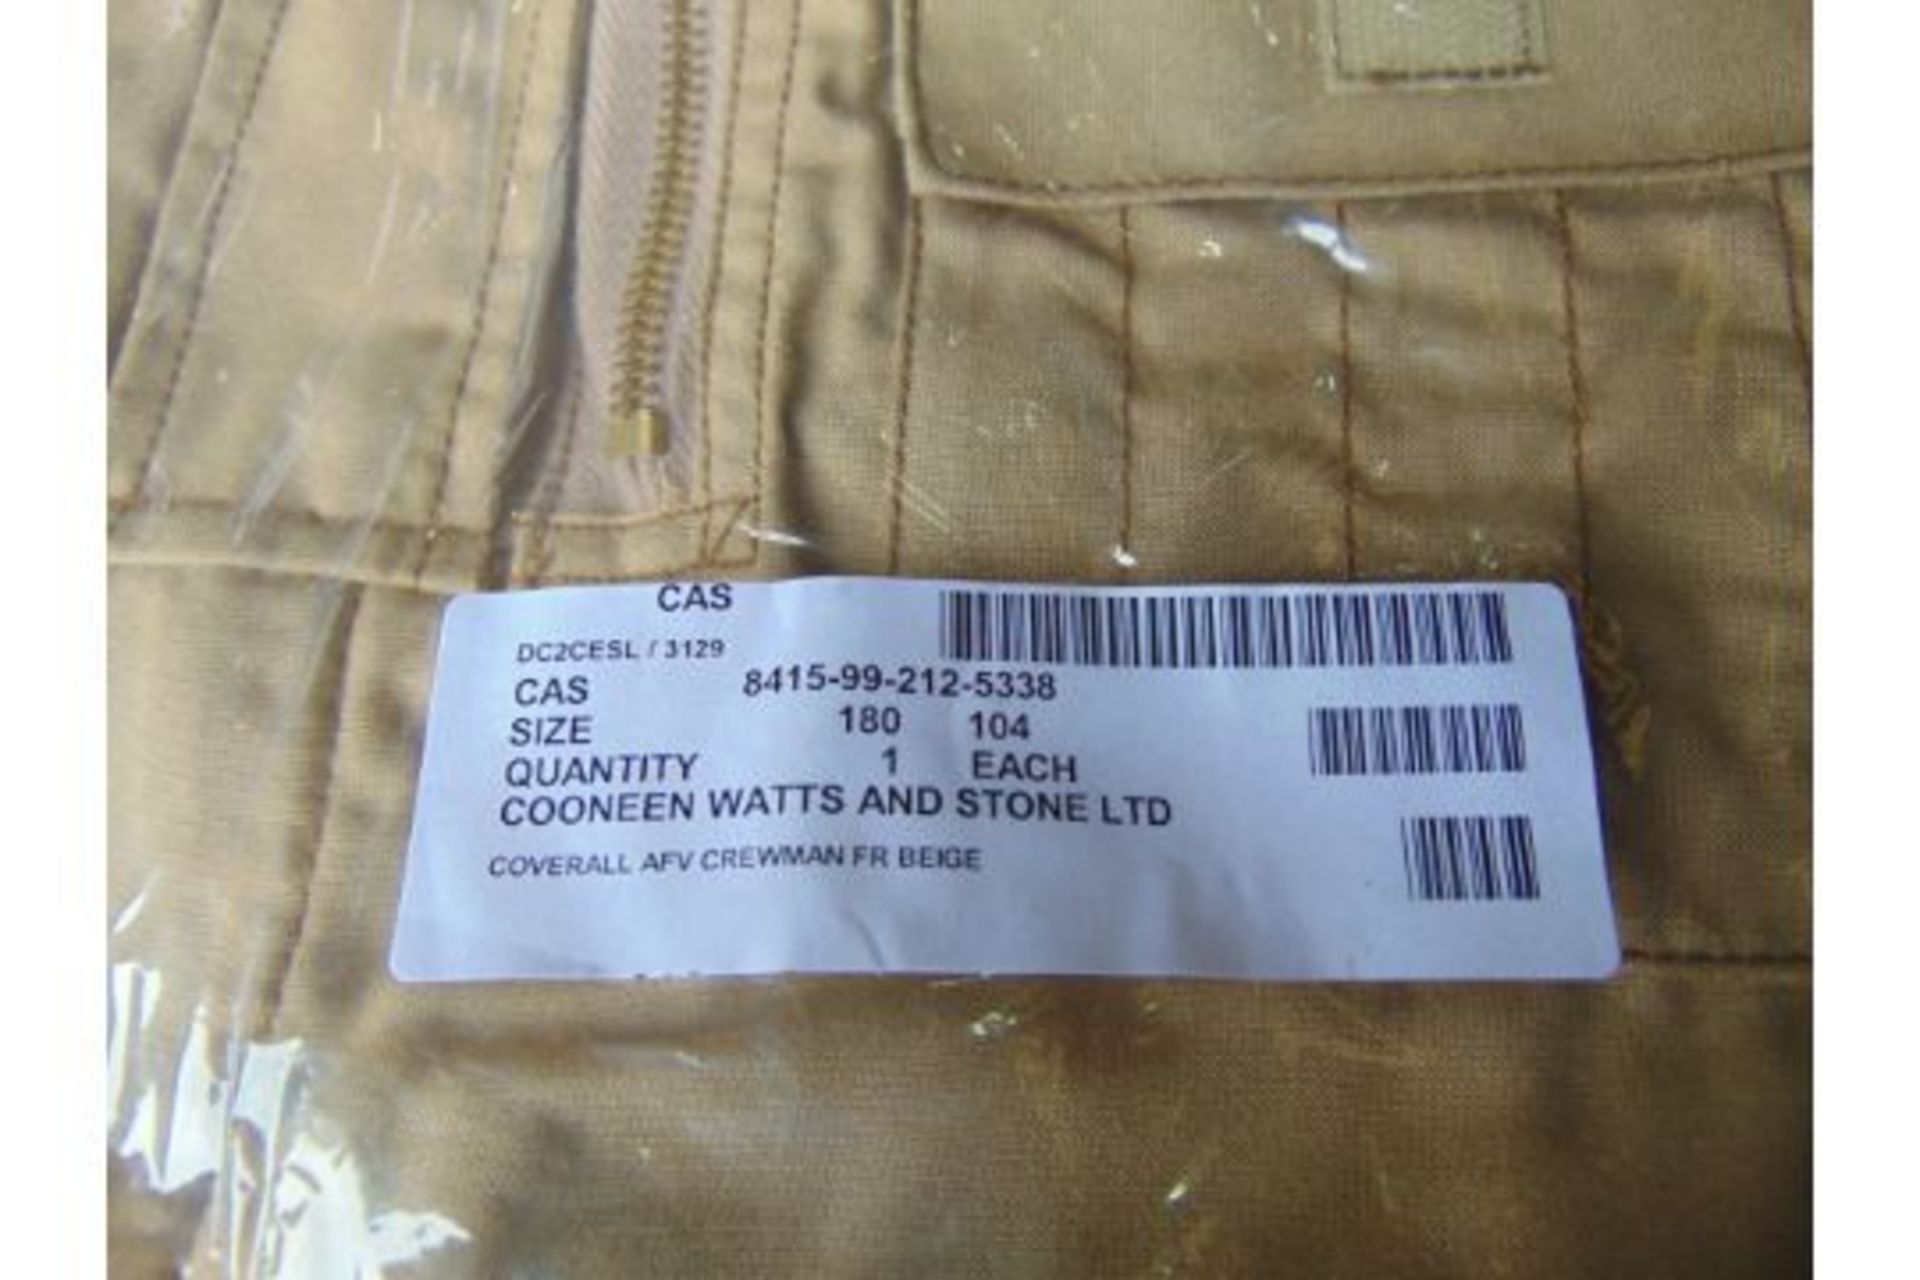 2 x New Unissued AFV Crew mans Coverall in Original Packing - Image 3 of 6